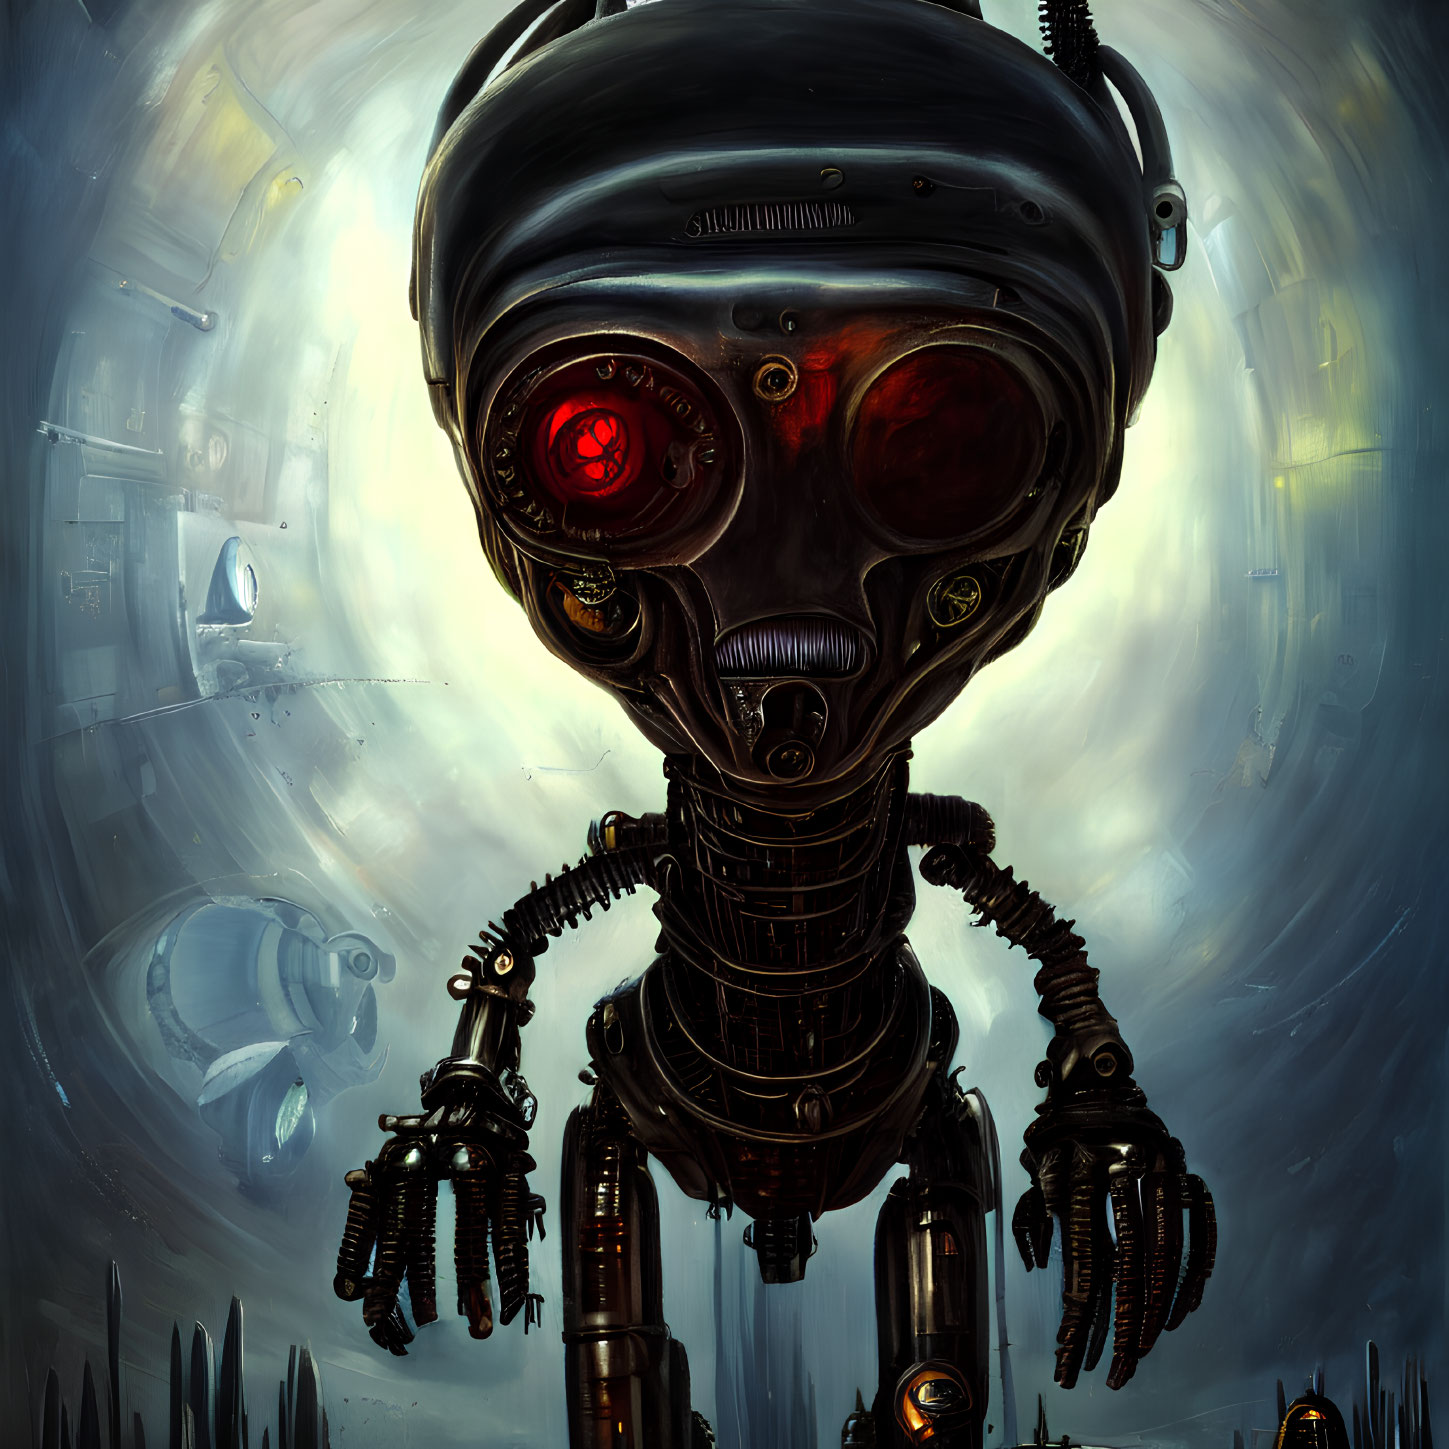 Detailed Illustration of Robot with Red Glowing Eyes on Swirling Blue Futuristic Background